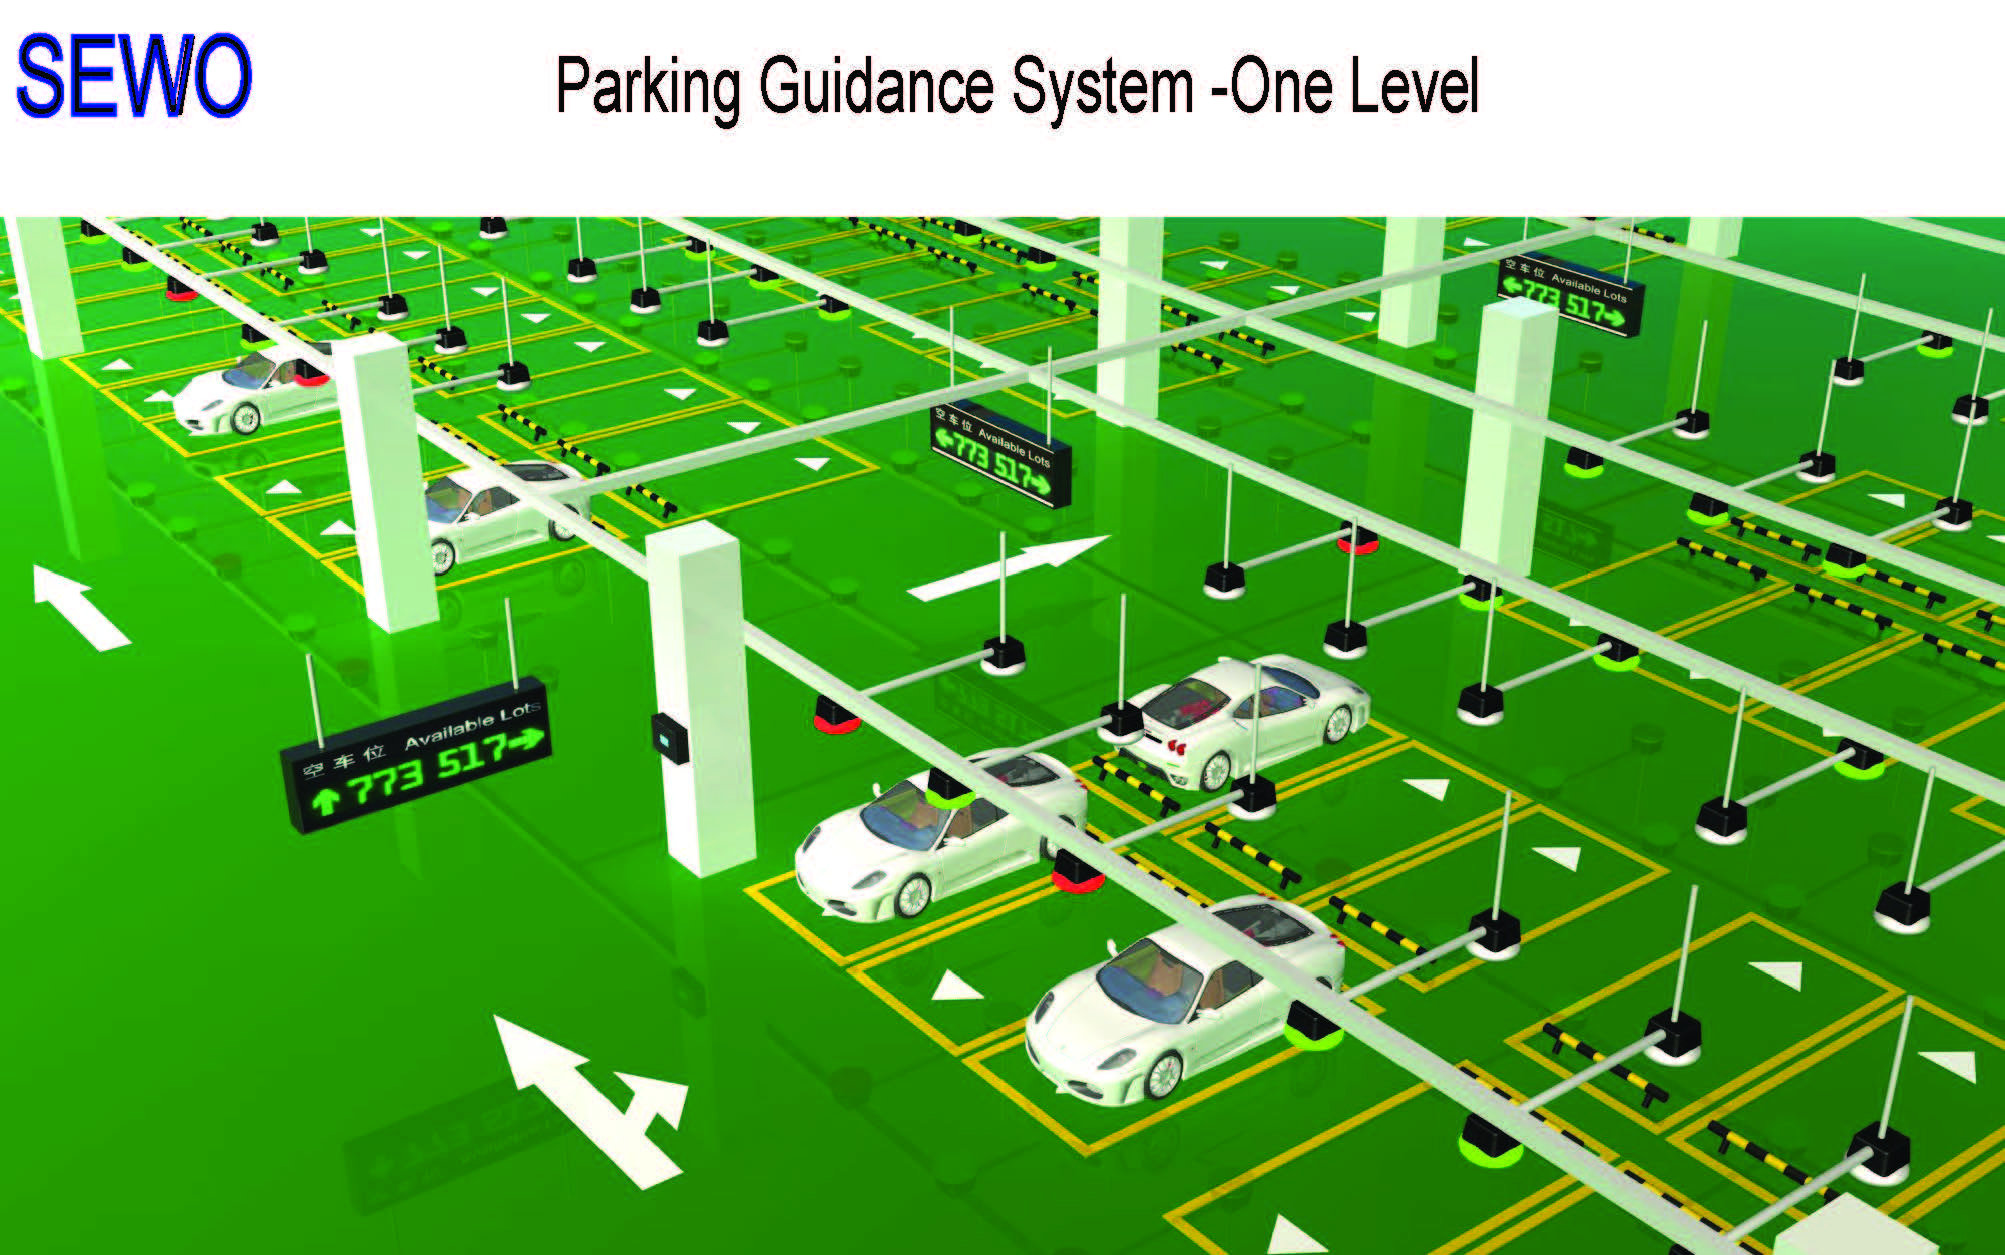 1-Parking Guidance System